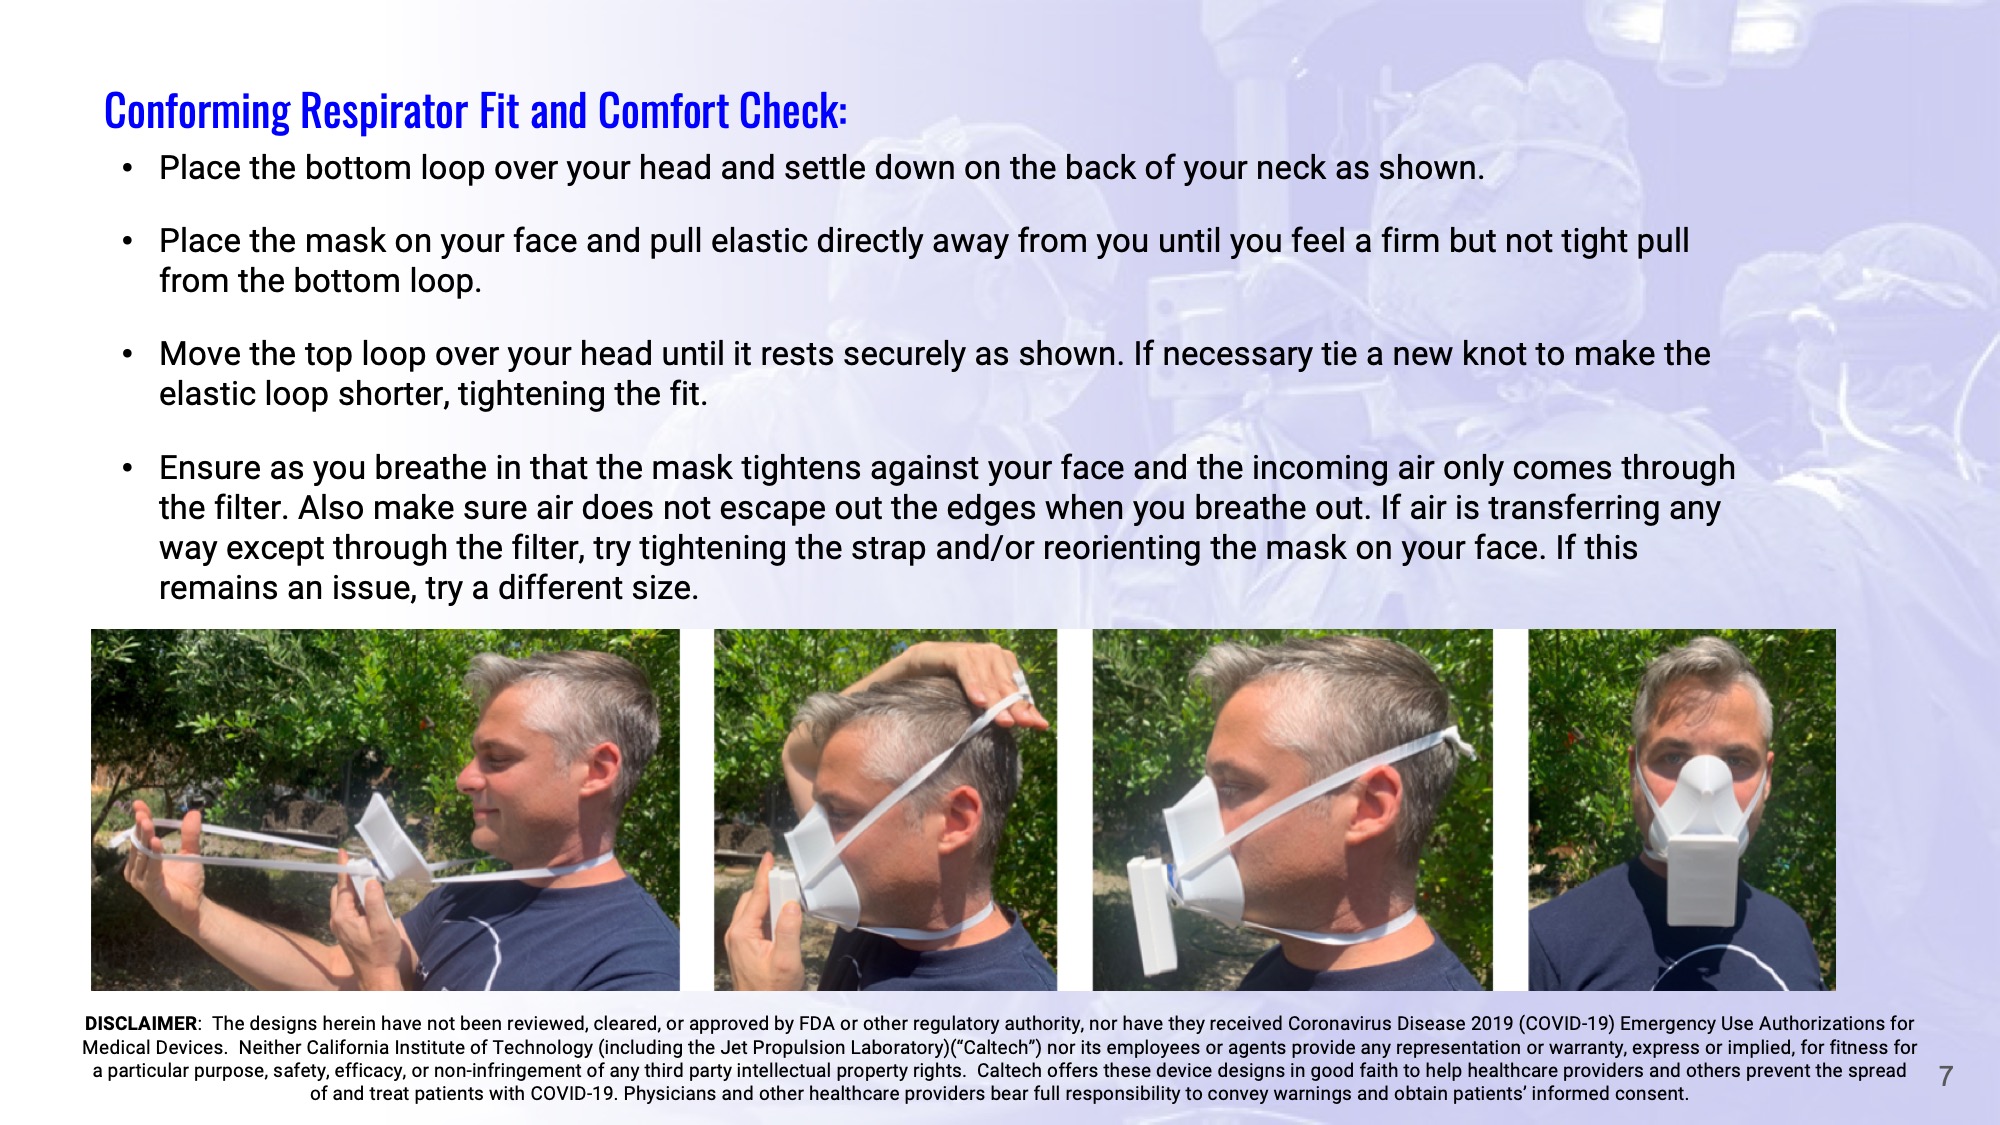 Slide 7: Conforming Respirator Fit and Comfort Check: Place the bottom loop over your head and settle down on the back of your neck as shown.  Place the mask on your face and pull elastic directly away from you until you feel a firm but not tight pull from the bottom loop.  Move the top loop over your head until it rests securely as shown. If necessary tie a new knot to make the elastic loop shorter, tightening the fit.  Ensure as you breathe in that the mask tightens against your face and the incoming air only comes through the filter. Also make sure air does not escape out the edges when you breathe out. If air is transferring any way except through the filter, try tightening the strap and/or reorienting the mask on your face. If this remains an issue, try a different size.